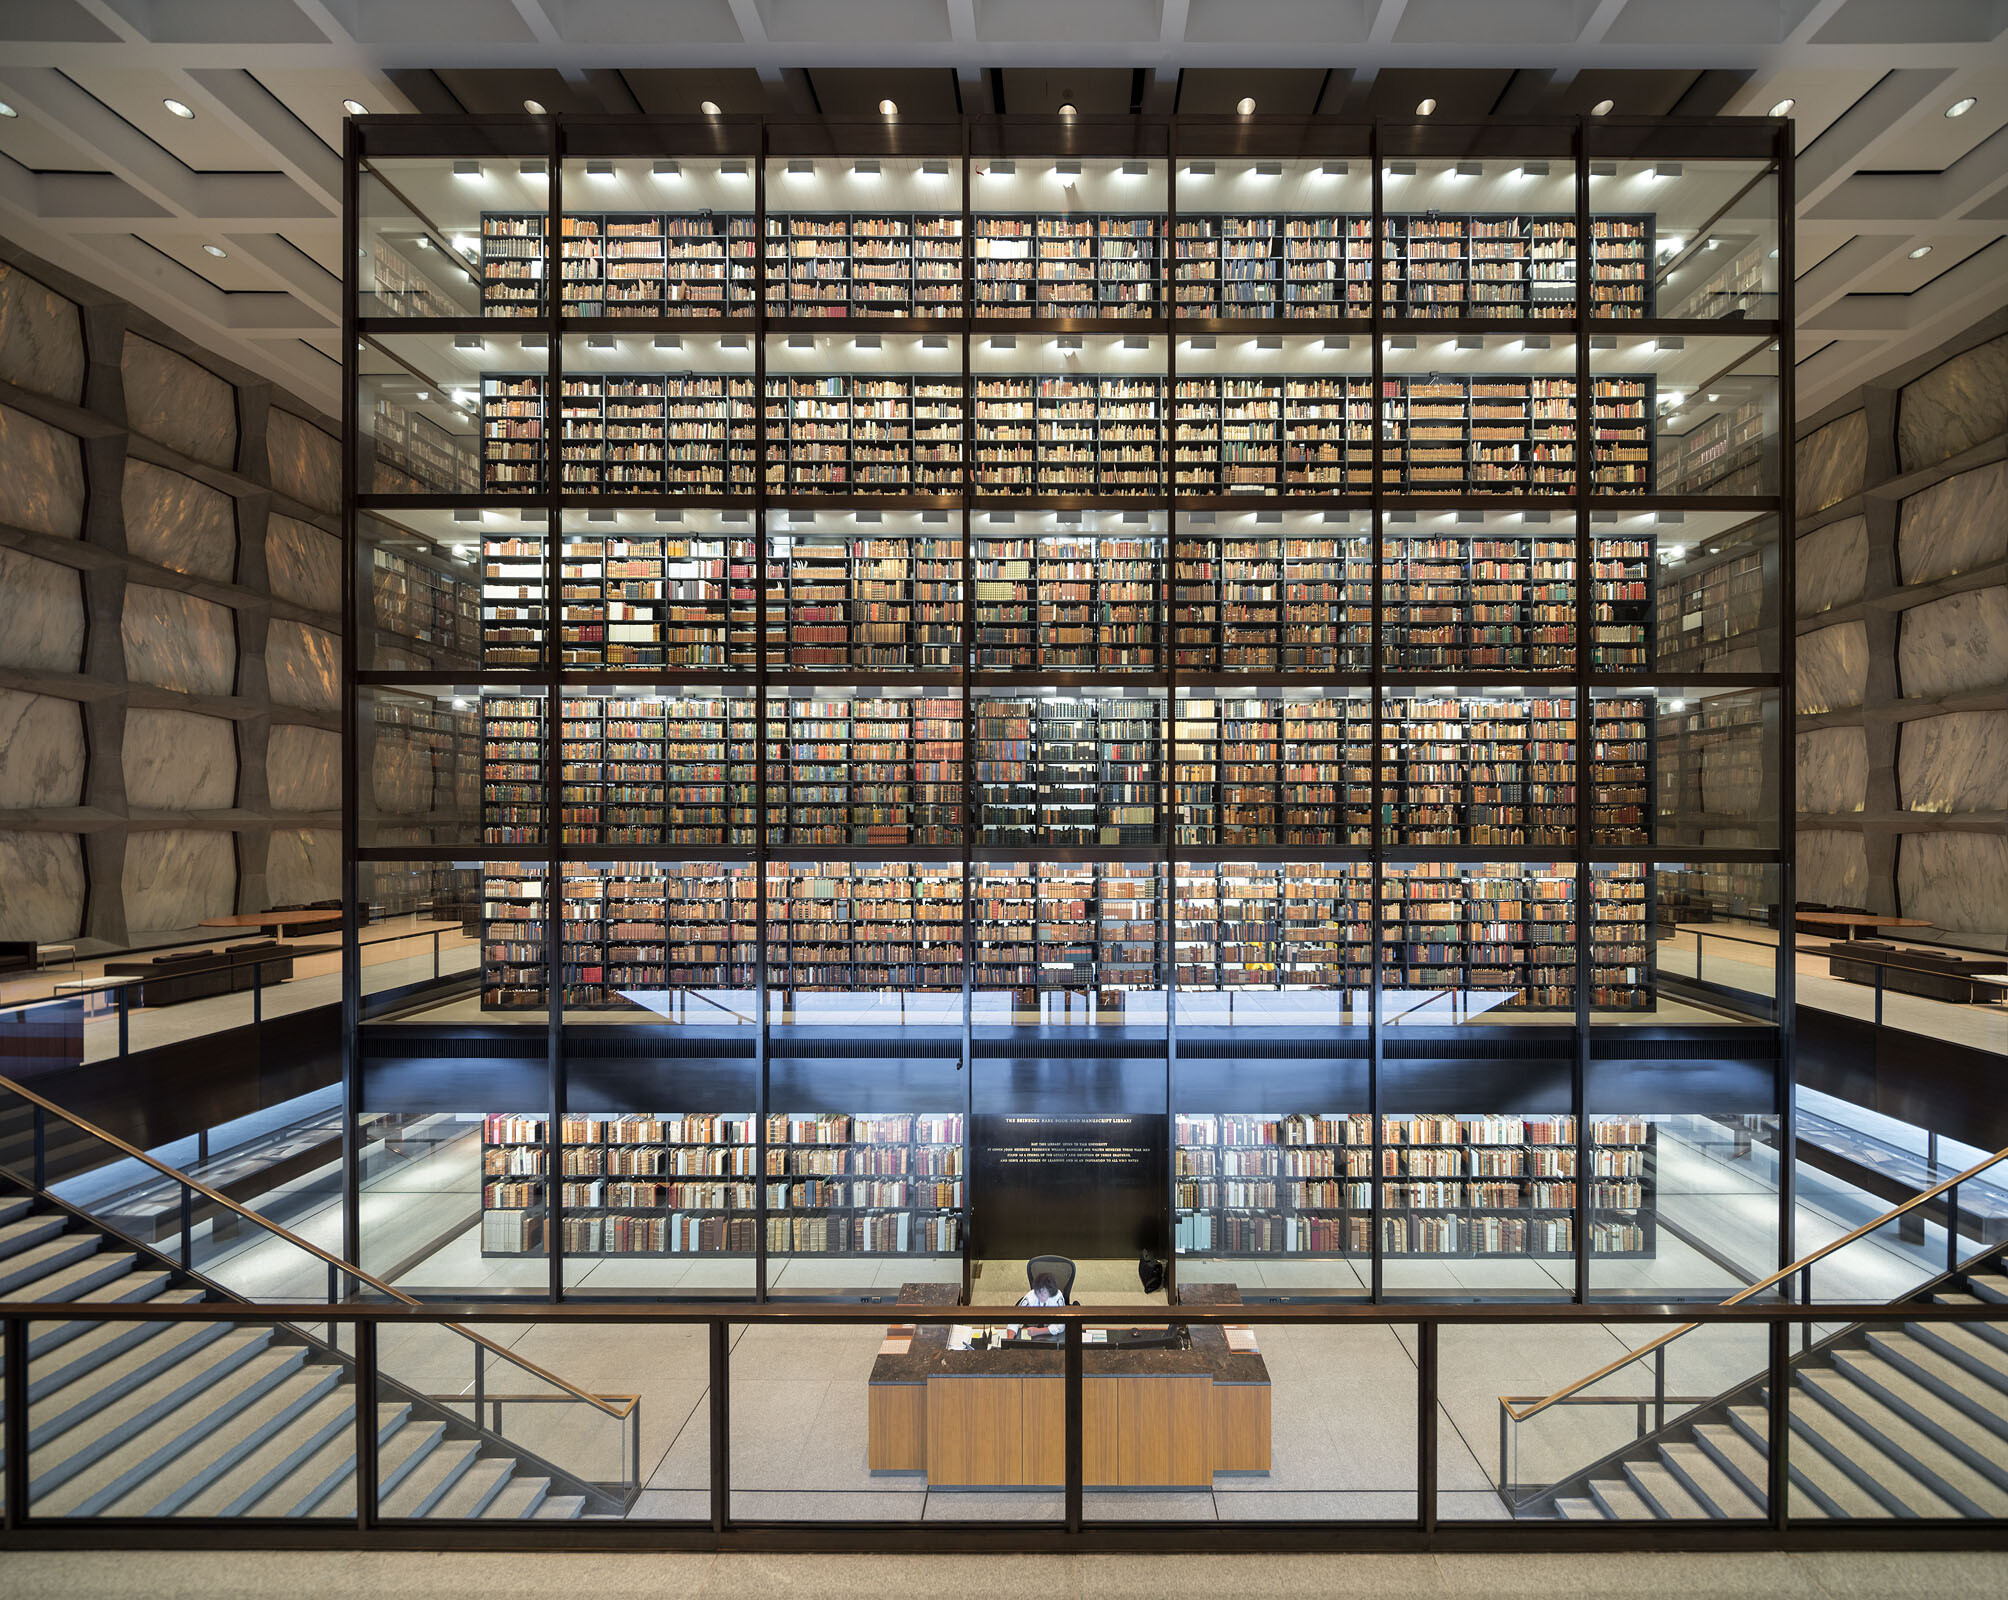 A large glass case filled with rare books in a library.